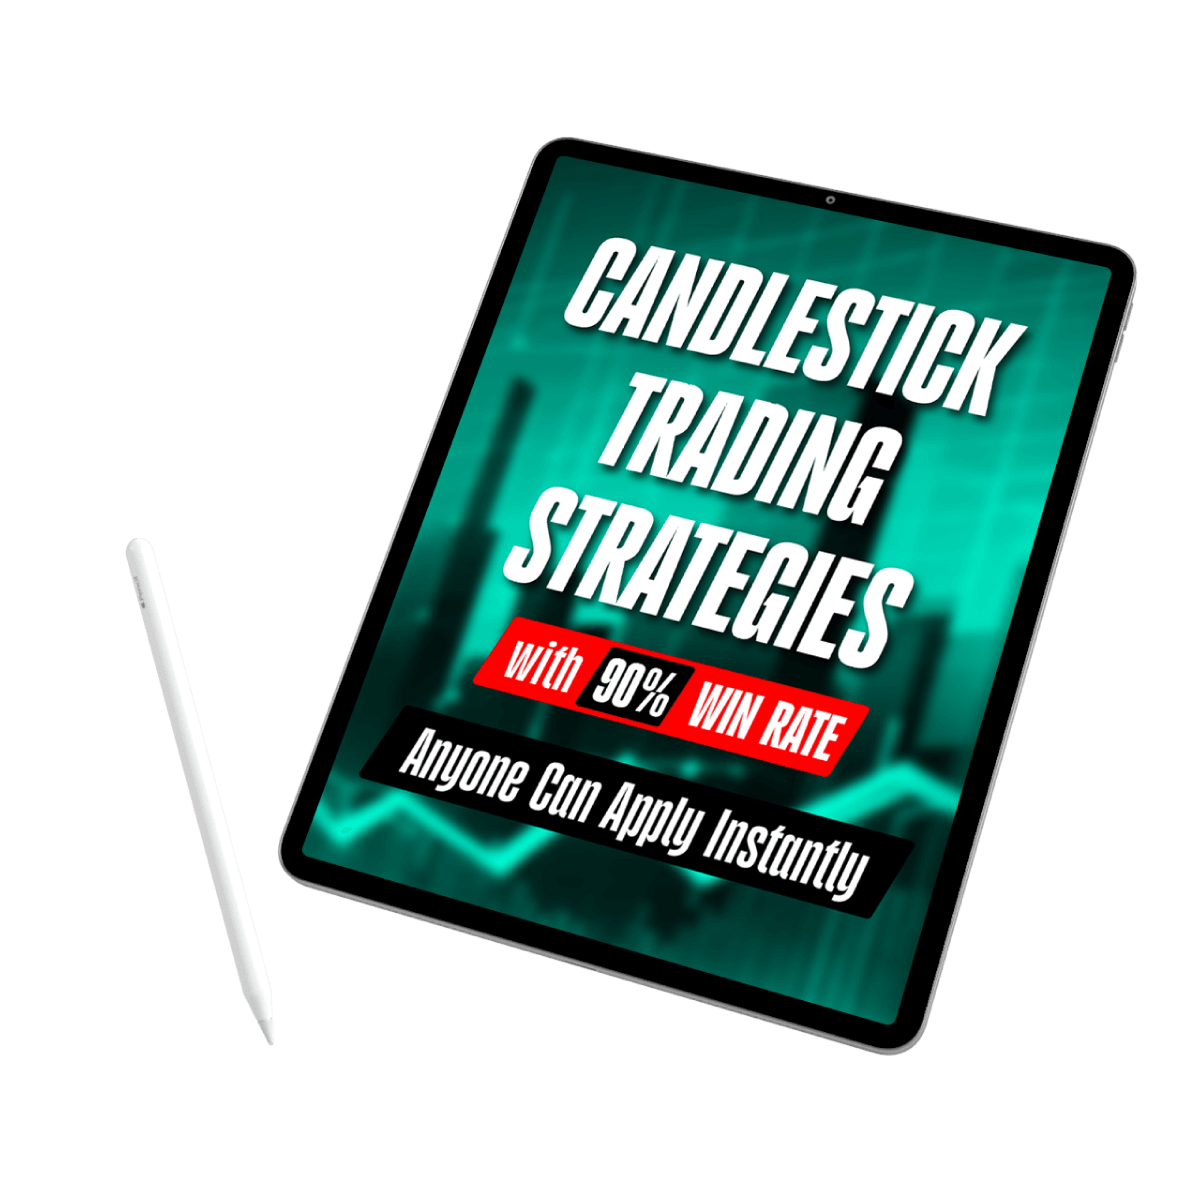 FxMagnetic-Products-Candlestick-Strategies-90-win-rate-1200x1200-optimized